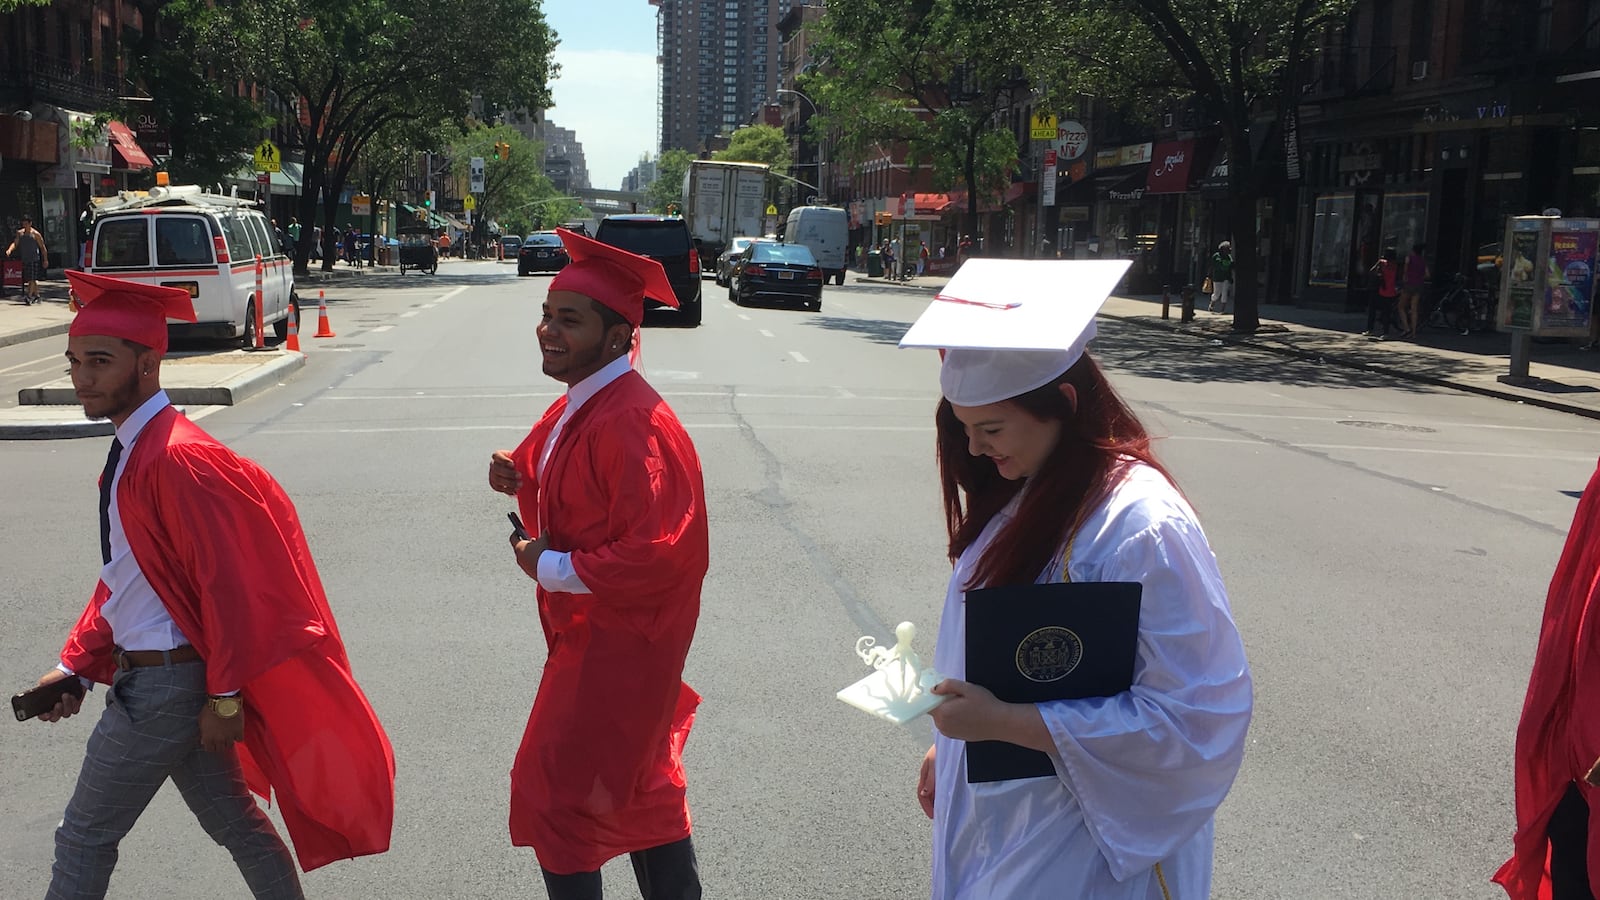 Leigh Duignan walks to graduation with classmates from The Urban Assembly Gateway School for Technology.